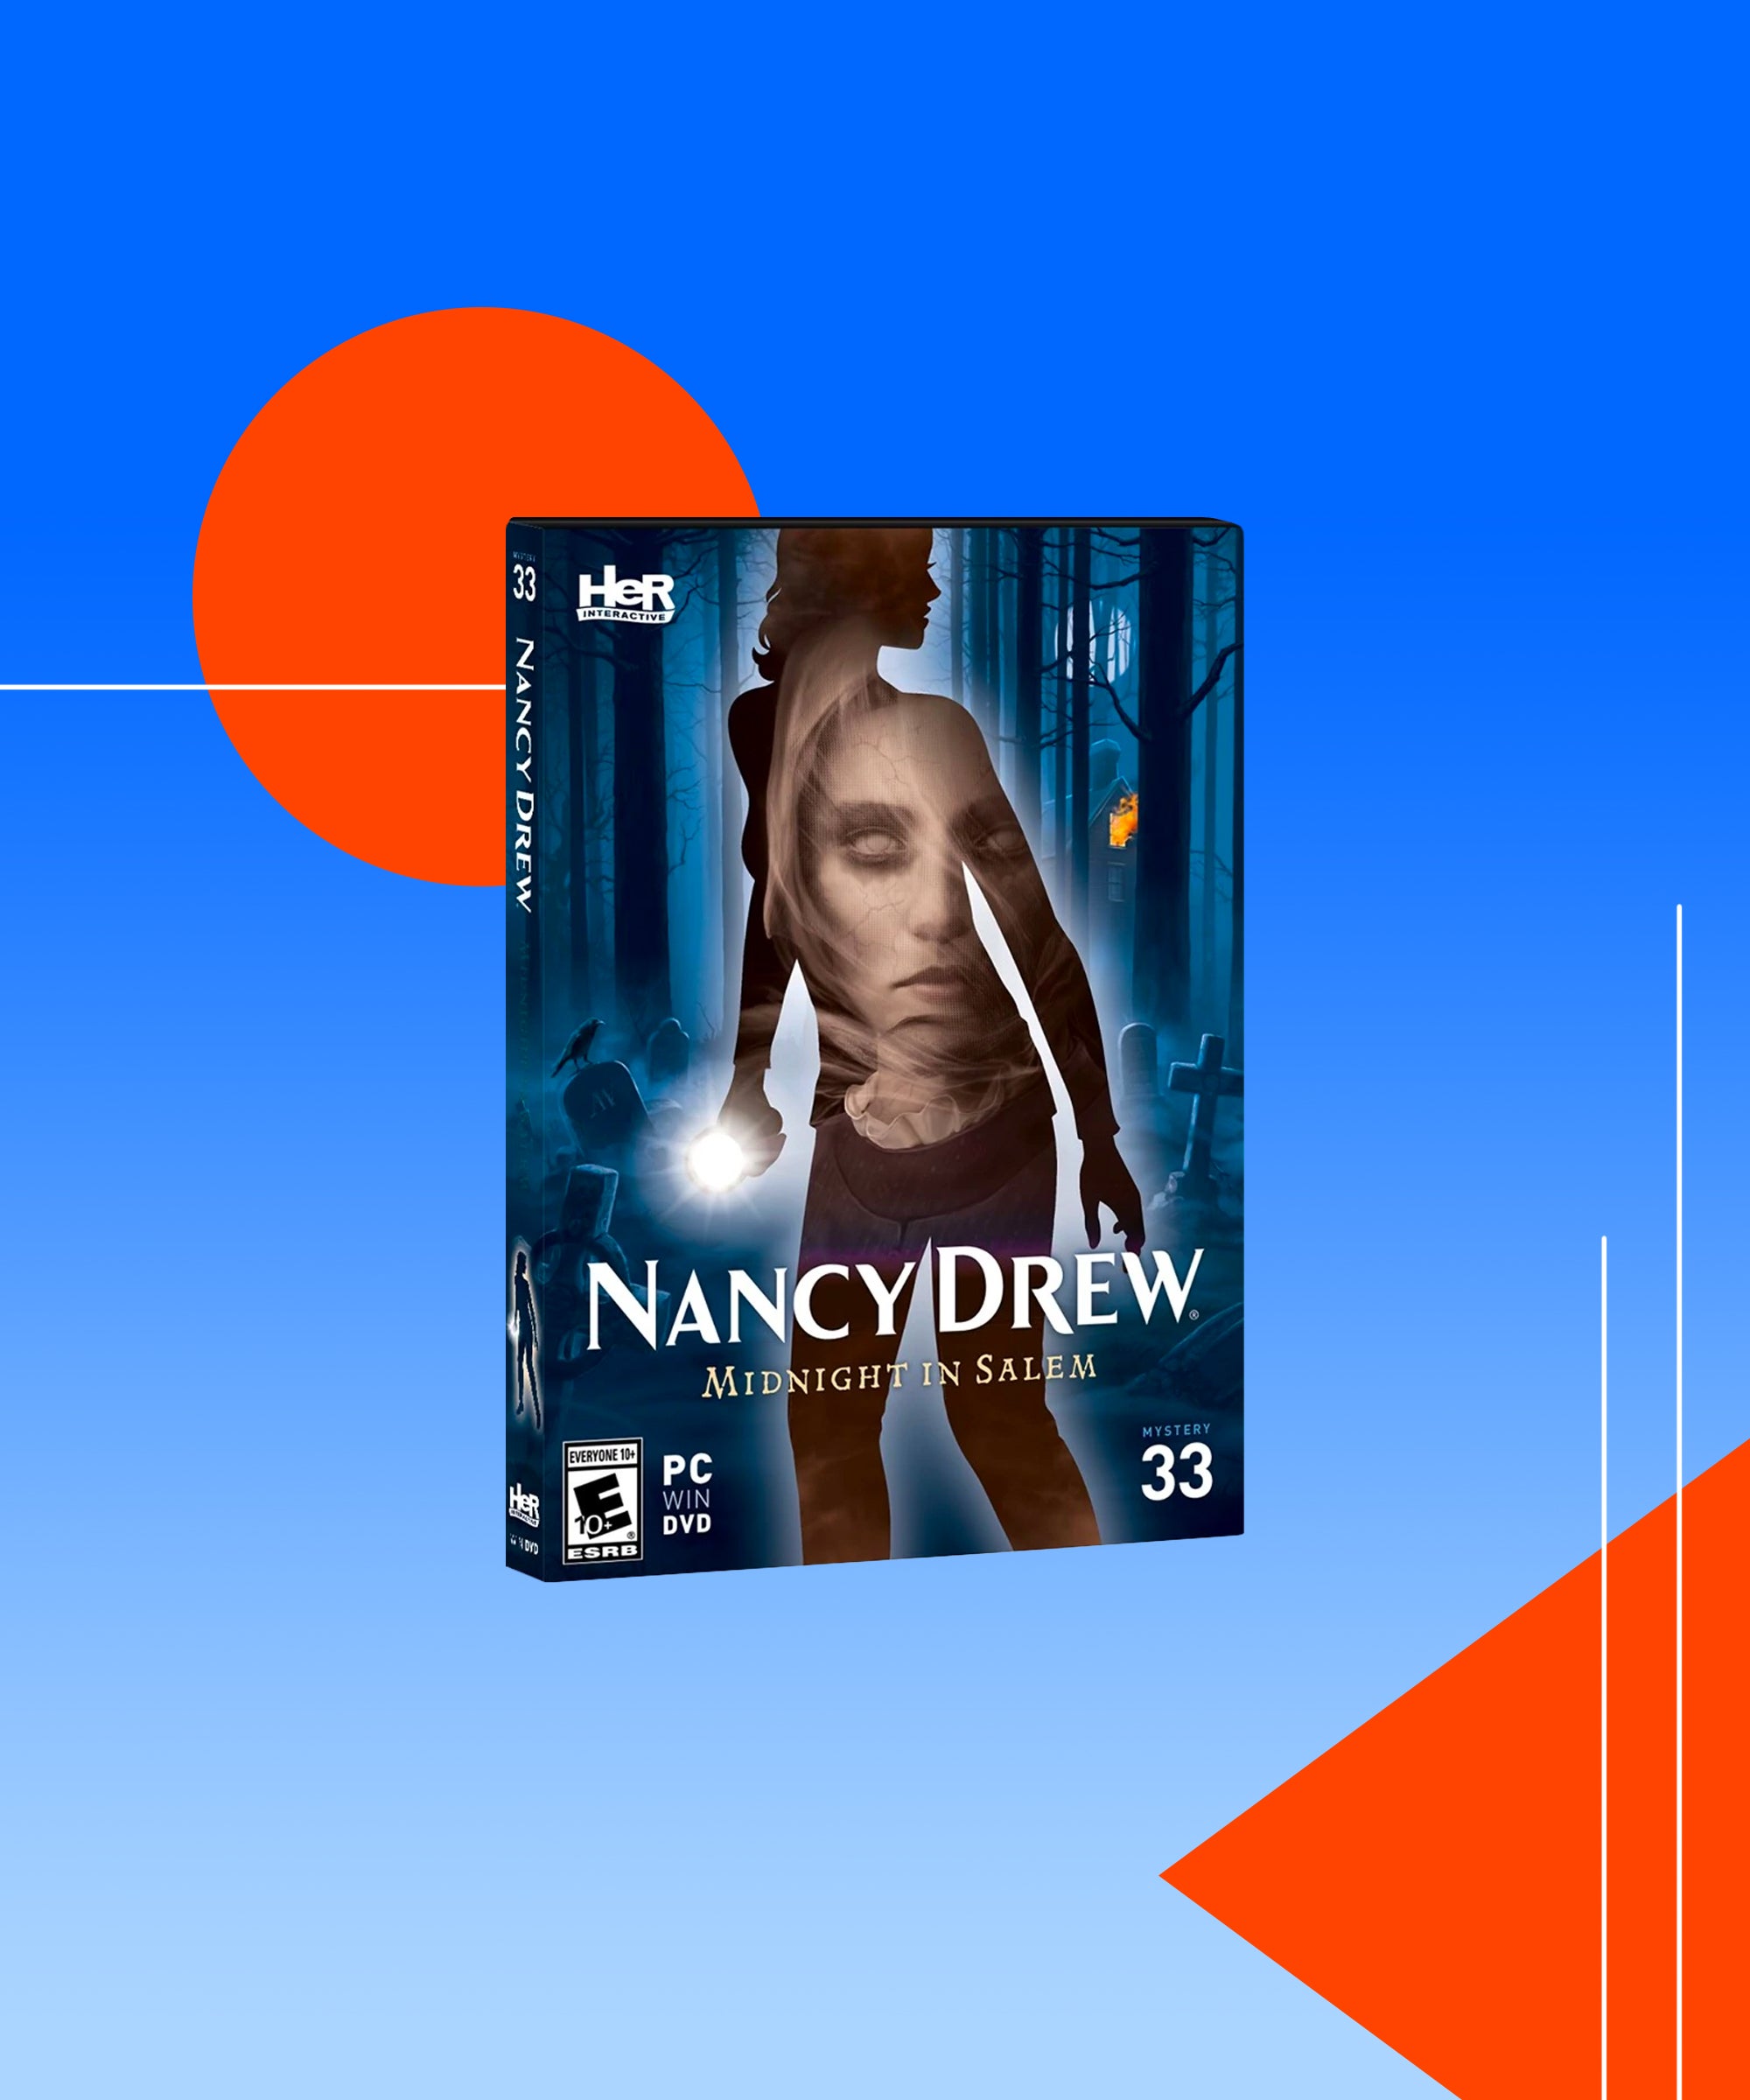 cant play nancy drew games on windows 10